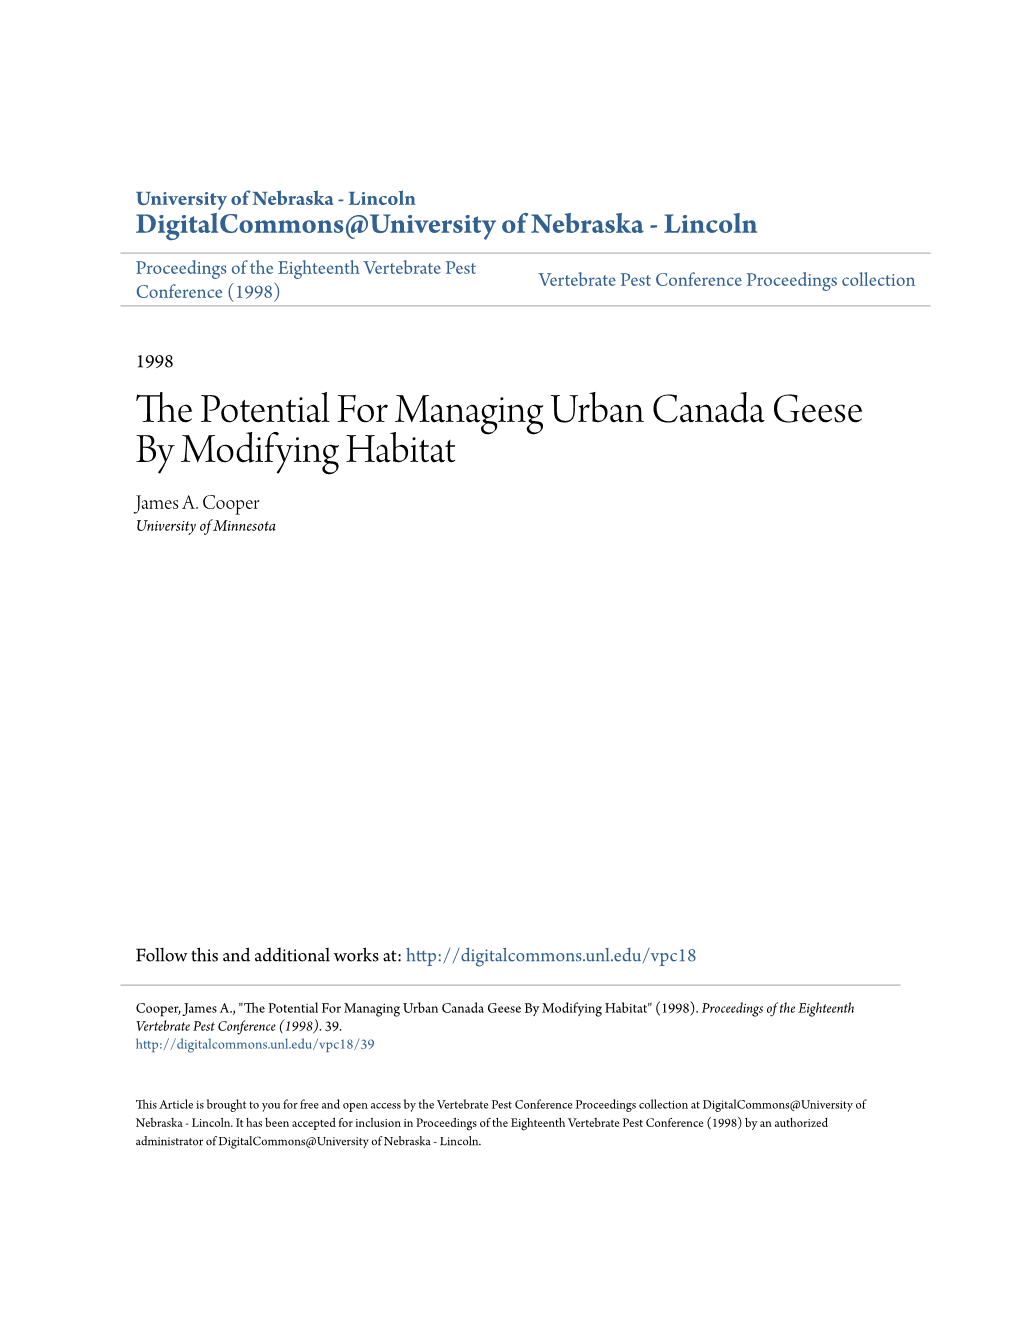 The Potential for Managing Urban Canada Geese by Modifying Habitat